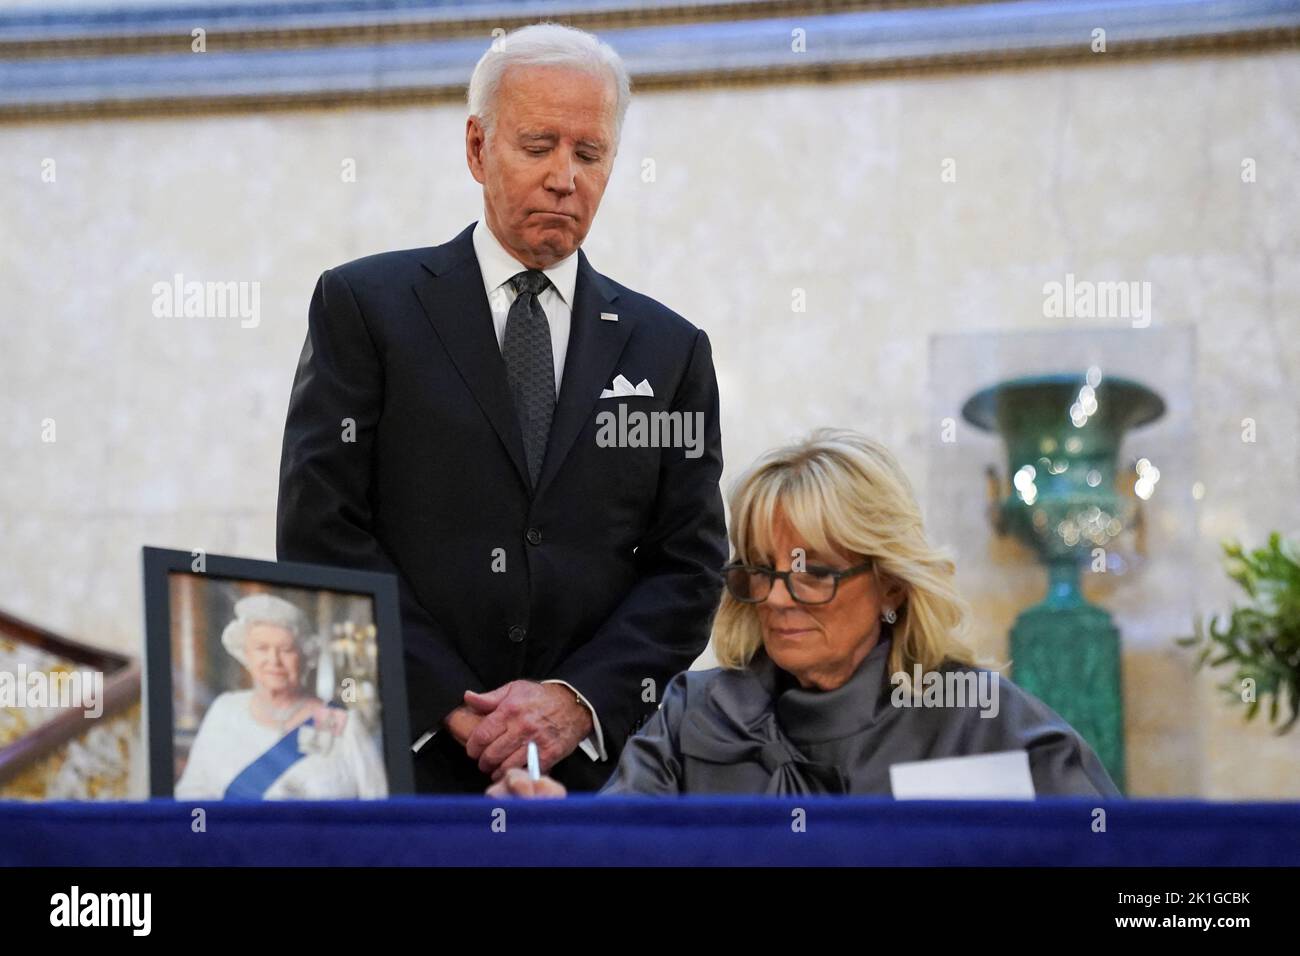 U.S. first lady Jill Biden, next to U.S. President Joe Biden, signs a condolence book for Britain's Queen Elizabeth, following her death, at Lancaster House in London, Britain, September 18, 2022. REUTERS/Kevin Lamarque Stock Photo